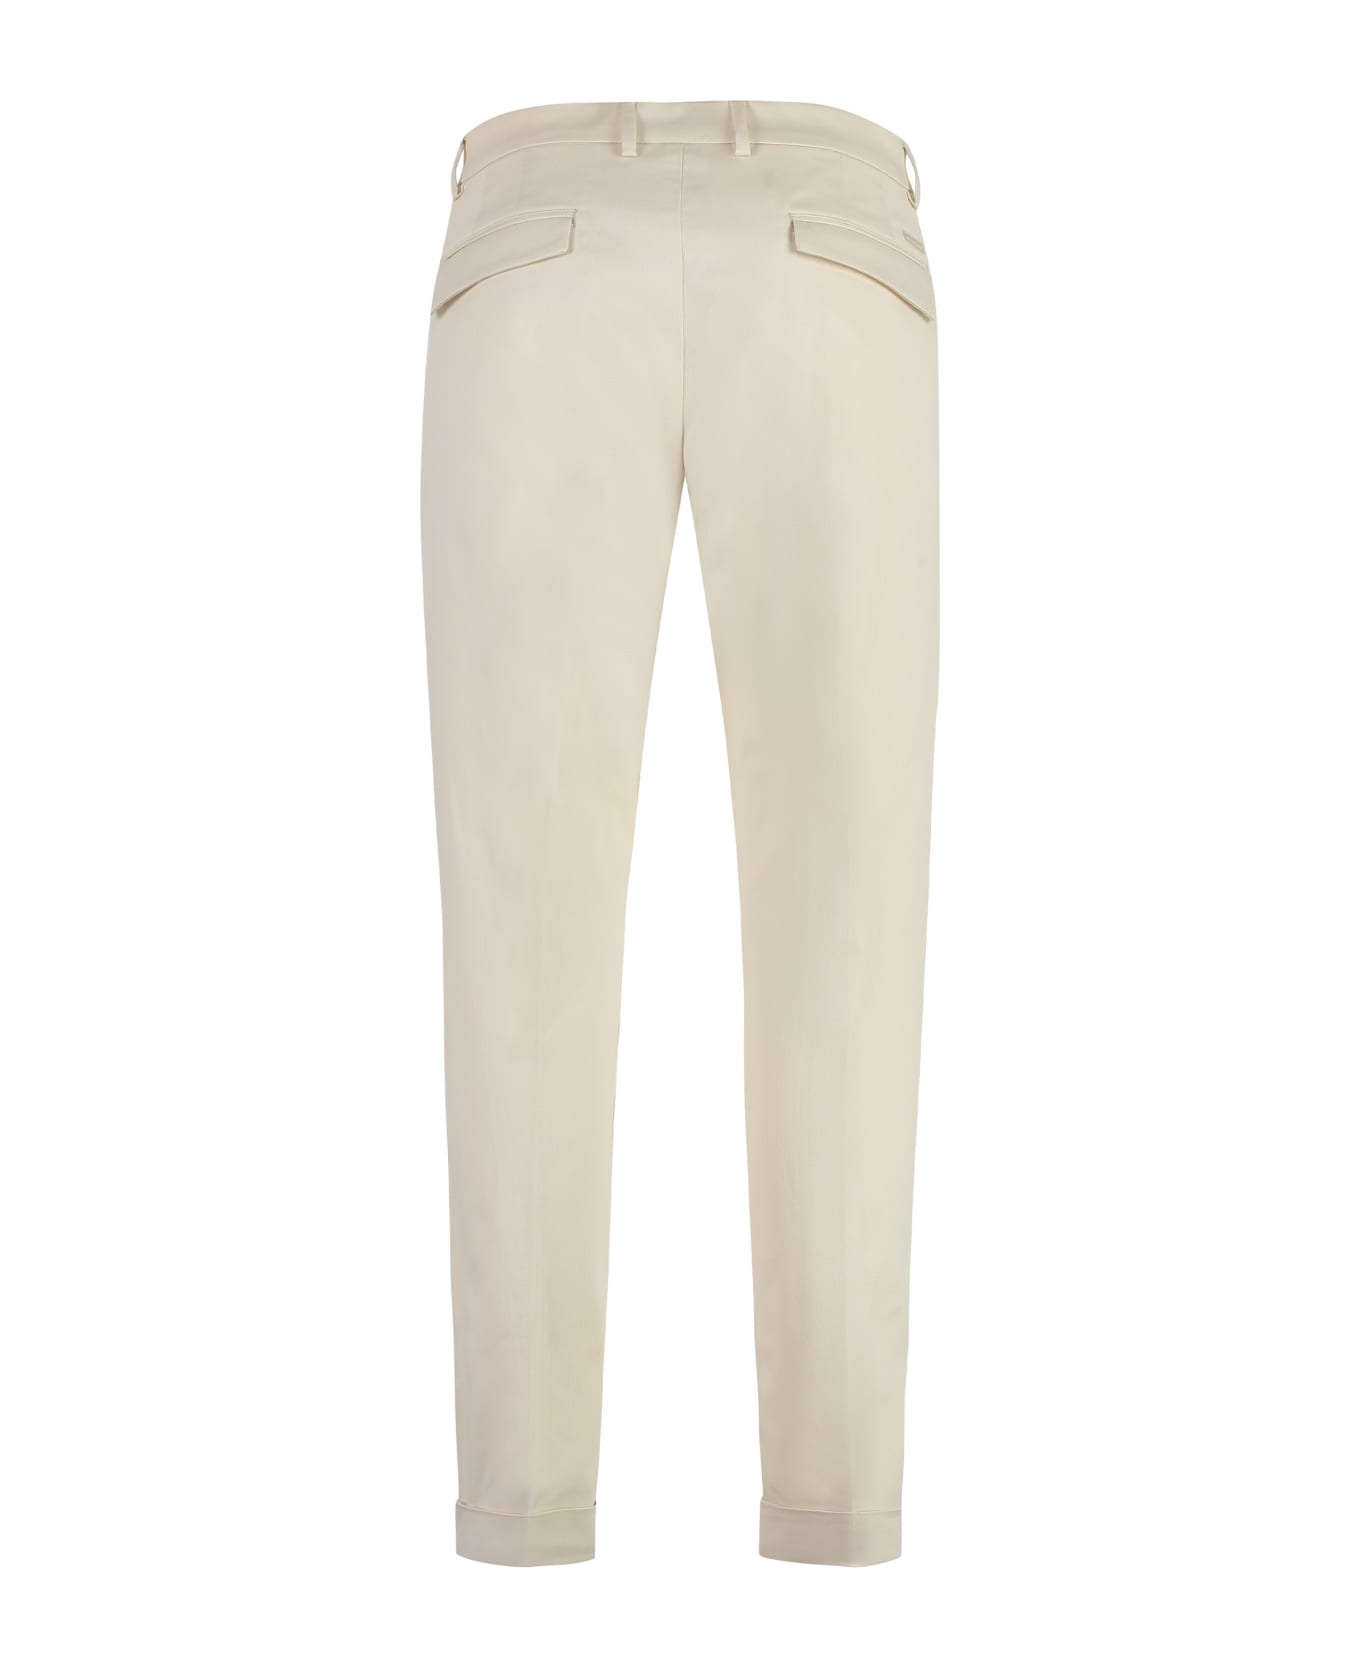 Paul&Shark Cotton Trousers - Ivory ボトムス